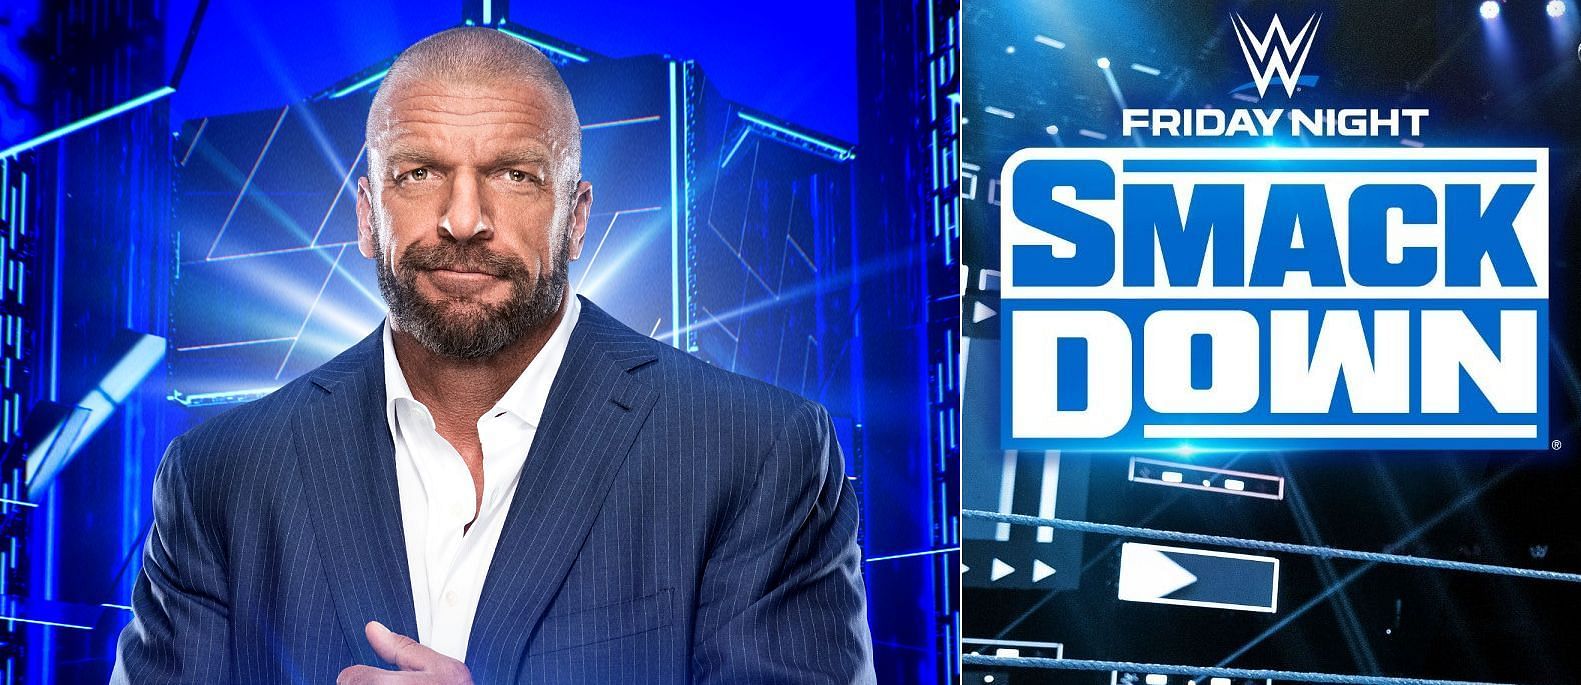 Triple H will appear on SmackDown